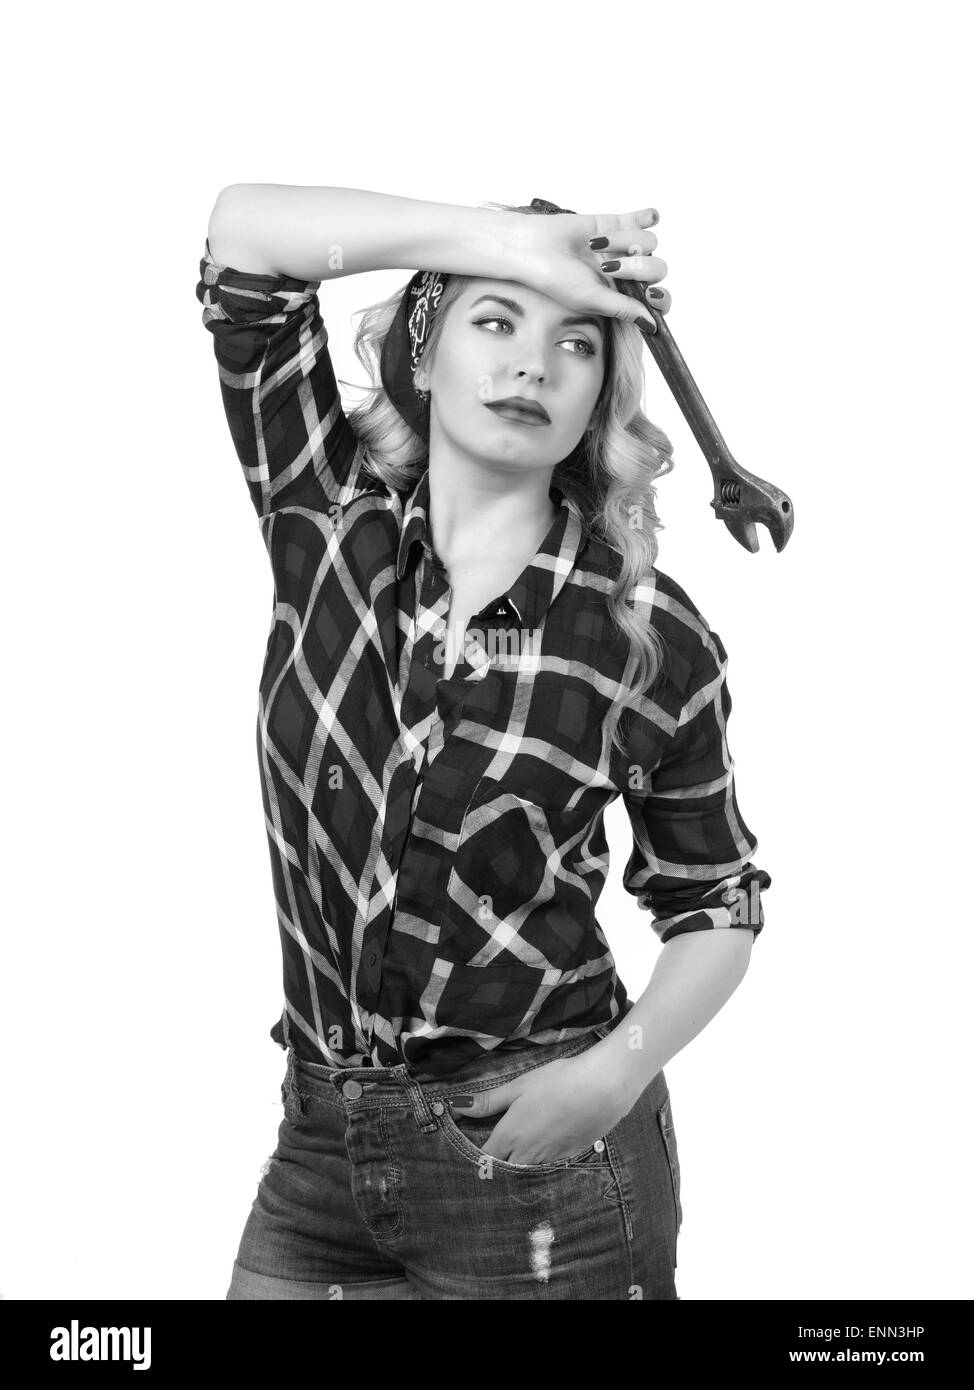 The blonde holds a wrench on a white background Stock Photo